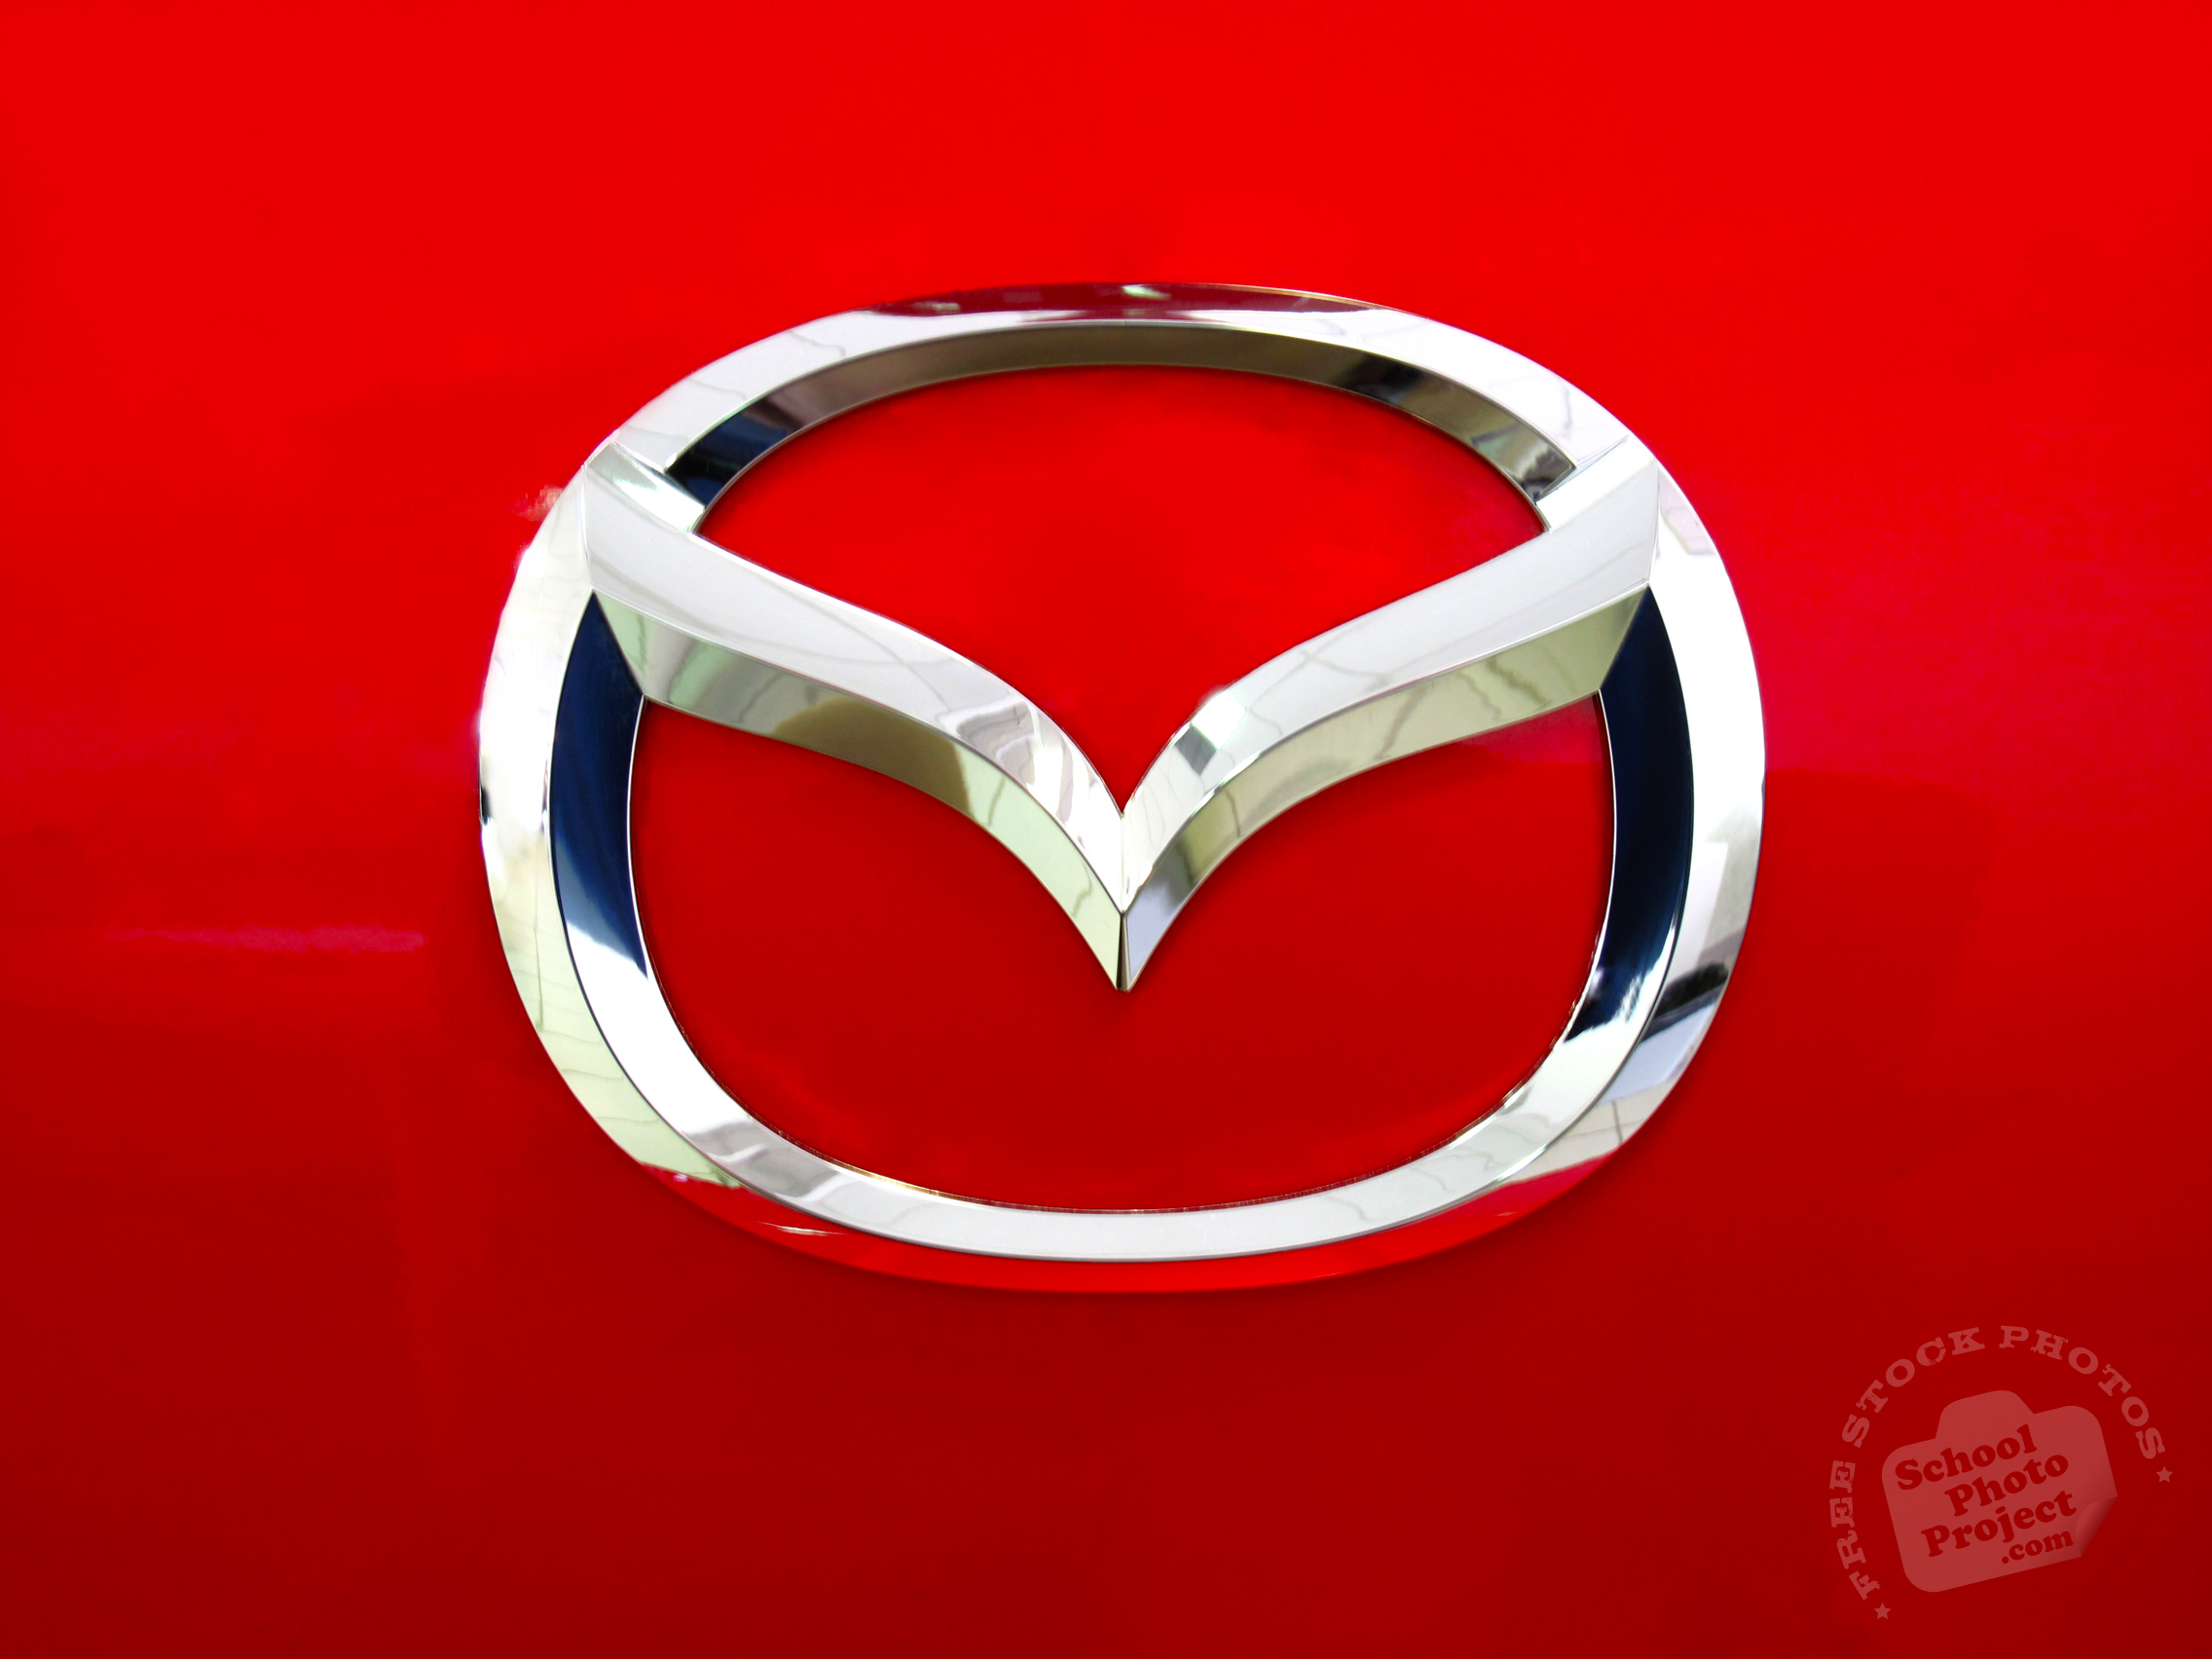 Mazda Logo Free Stock Photo Image Picture Red Mazda Logo Brand Royalty Free Car Stock Photography